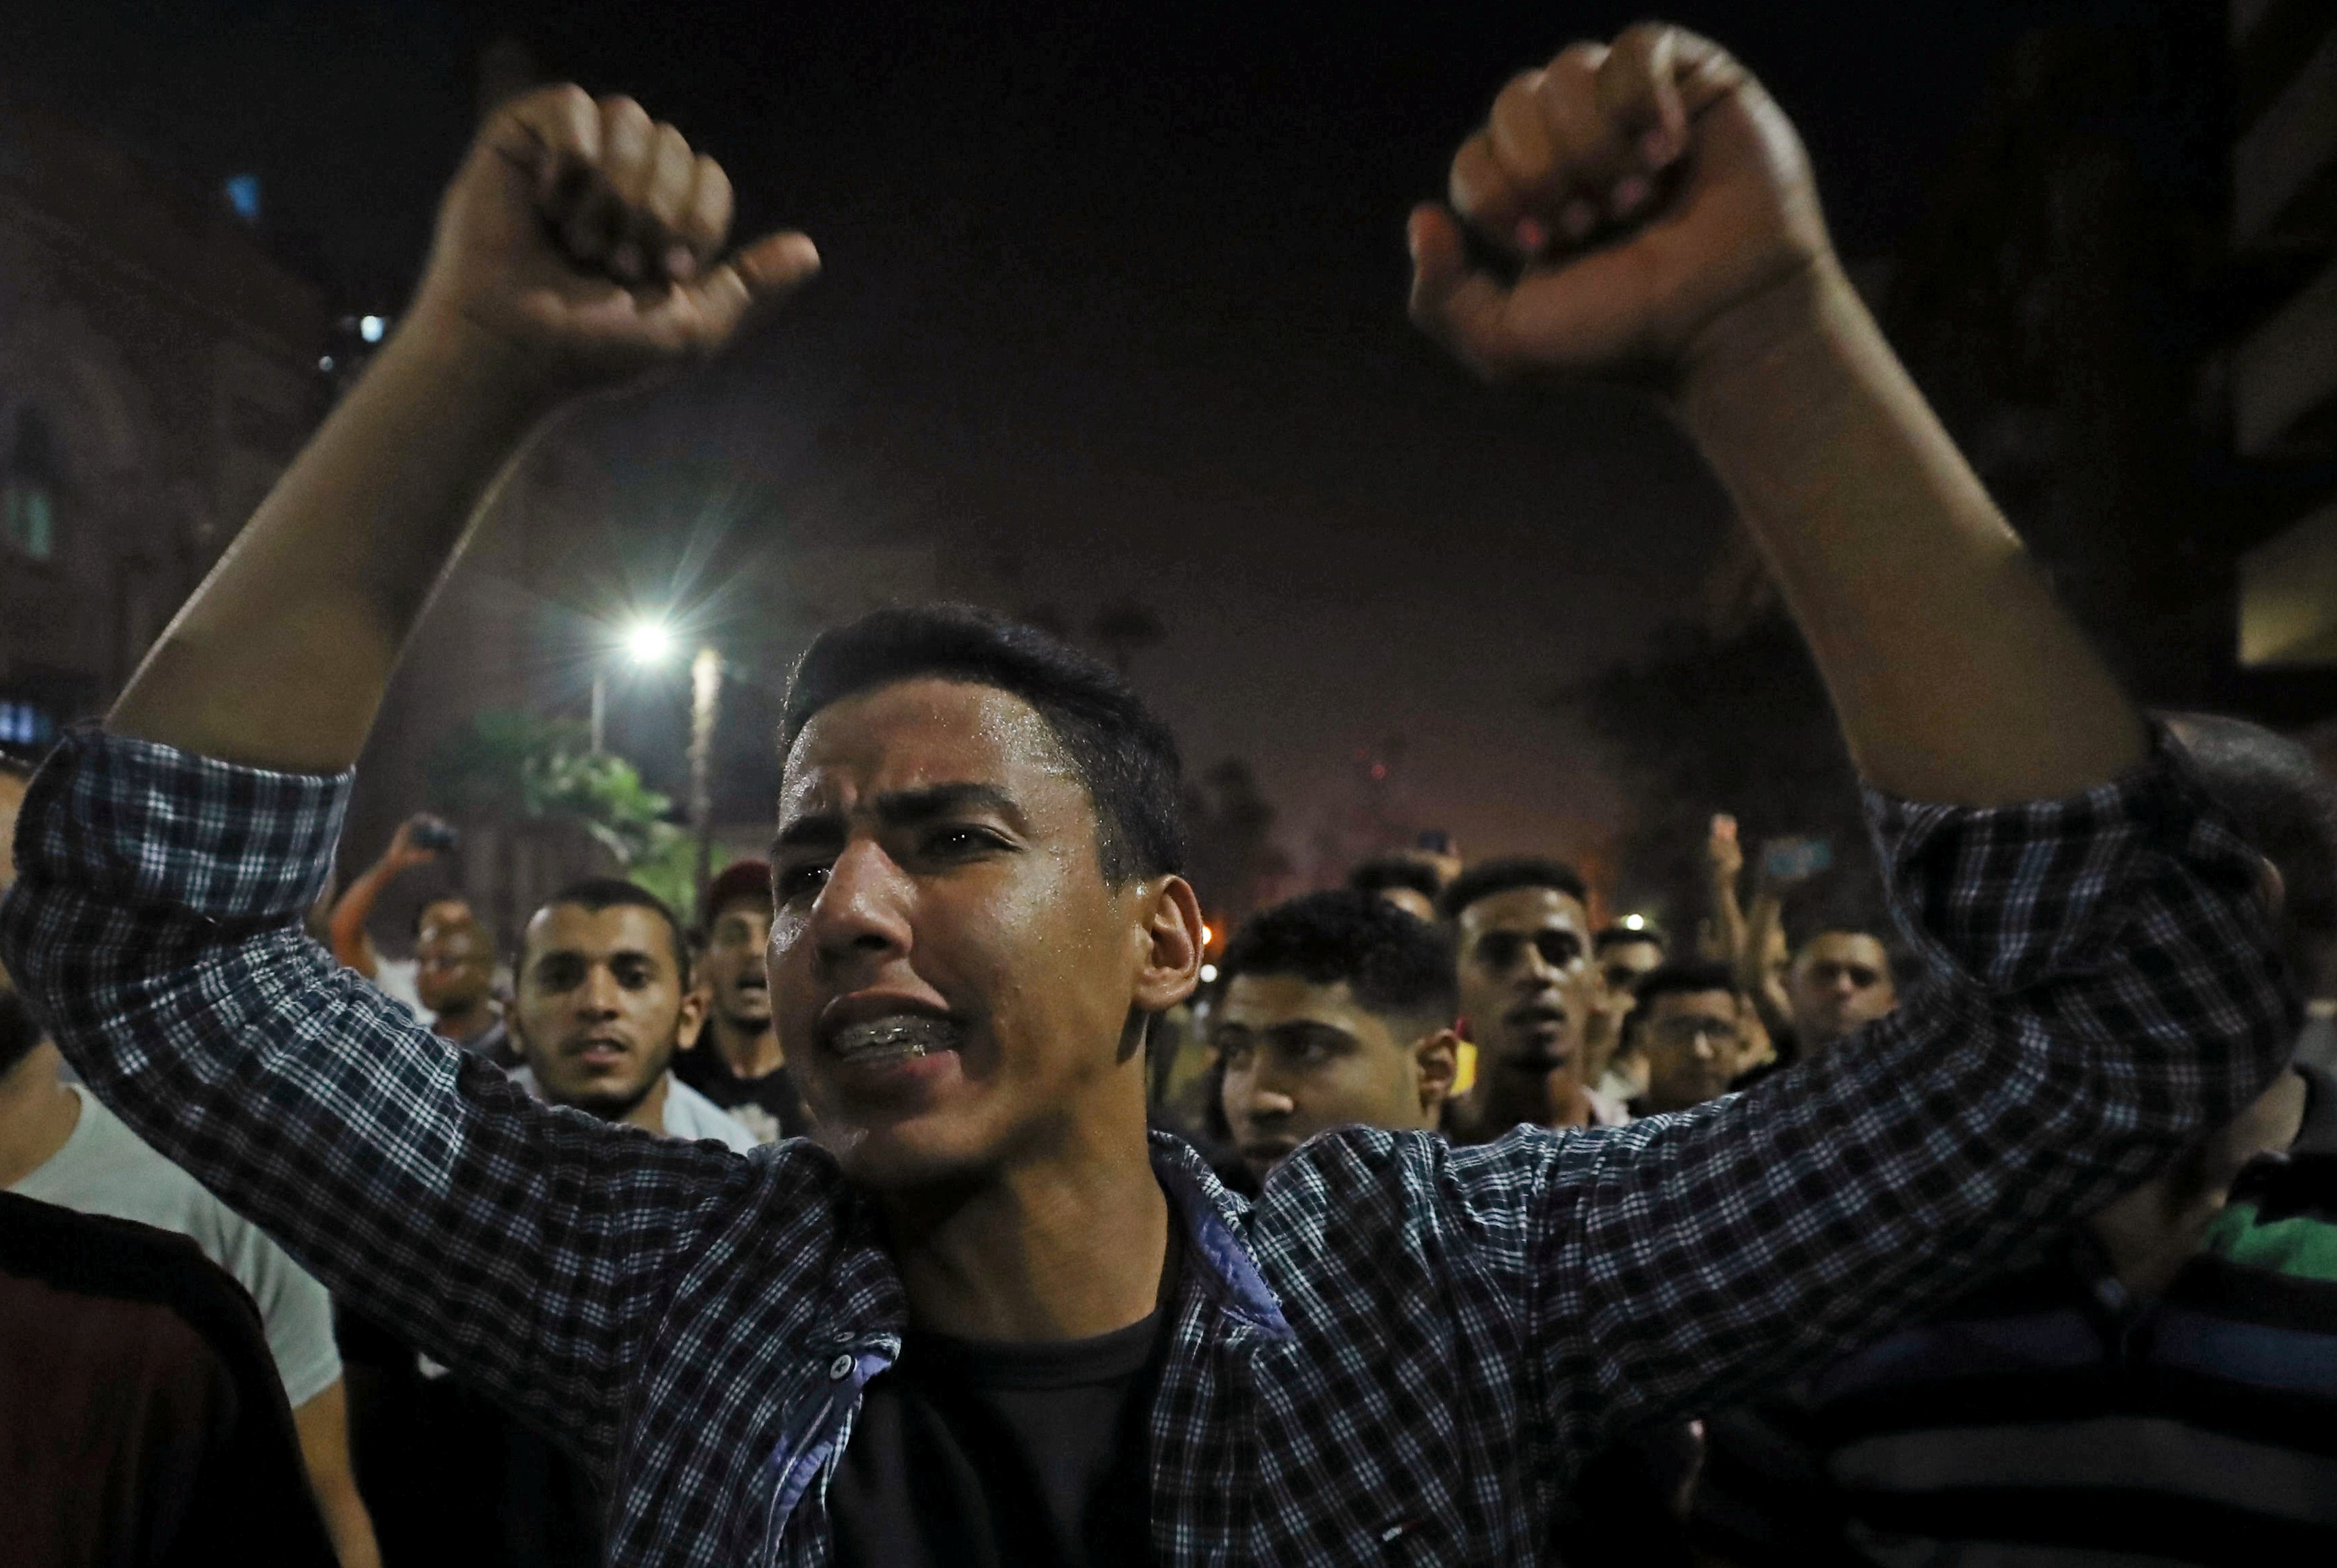 Small groups of protesters gather in central Cairo shouting anti-government slogans in Cairo, Egypt September 21, 2019